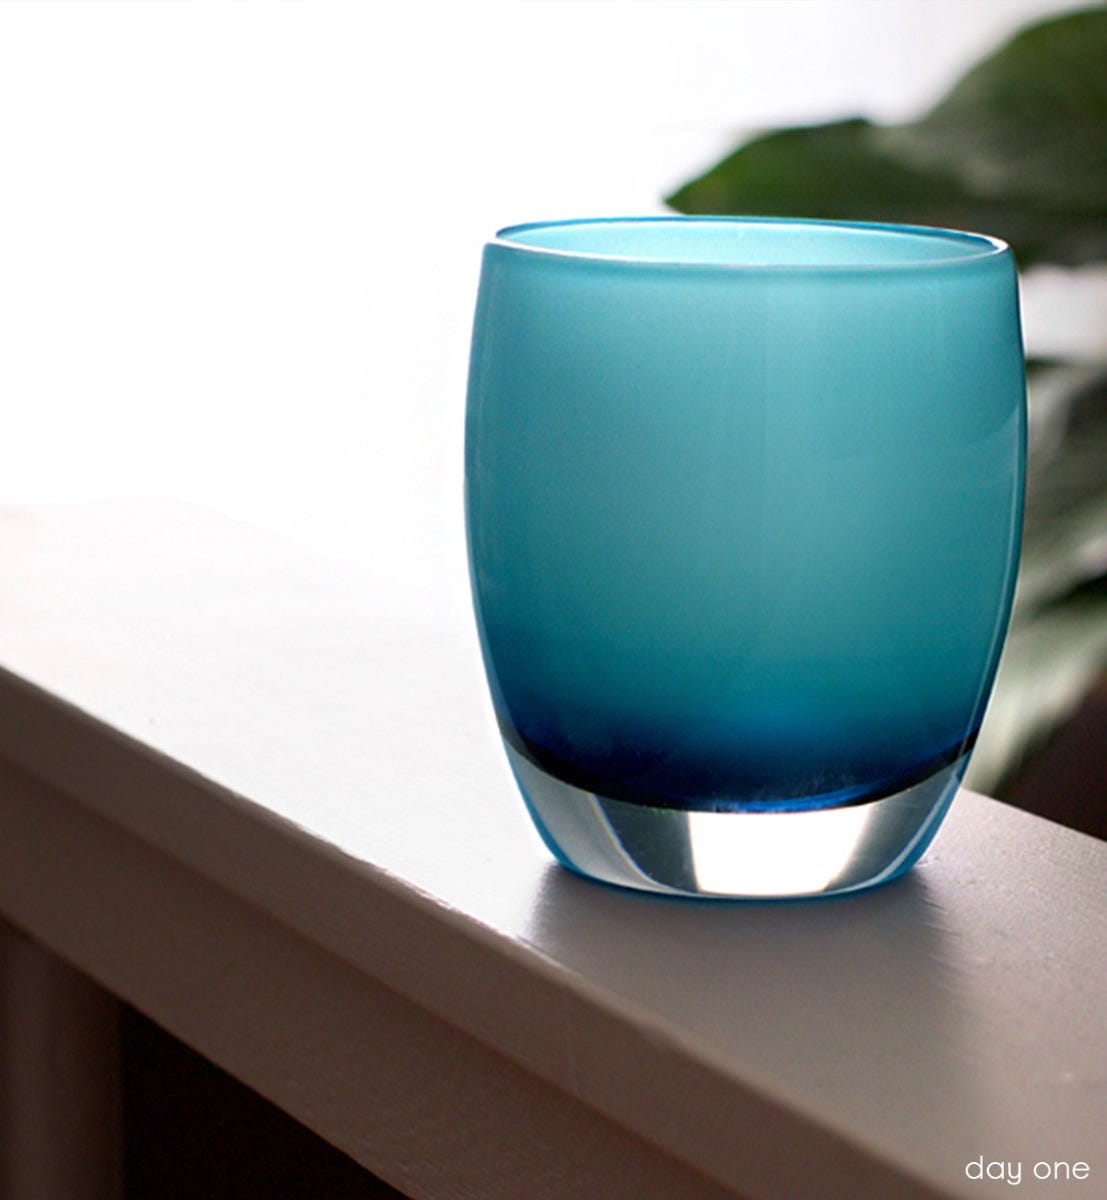 day one, bright blue with white interior, hand-blown glass votive candle holder.